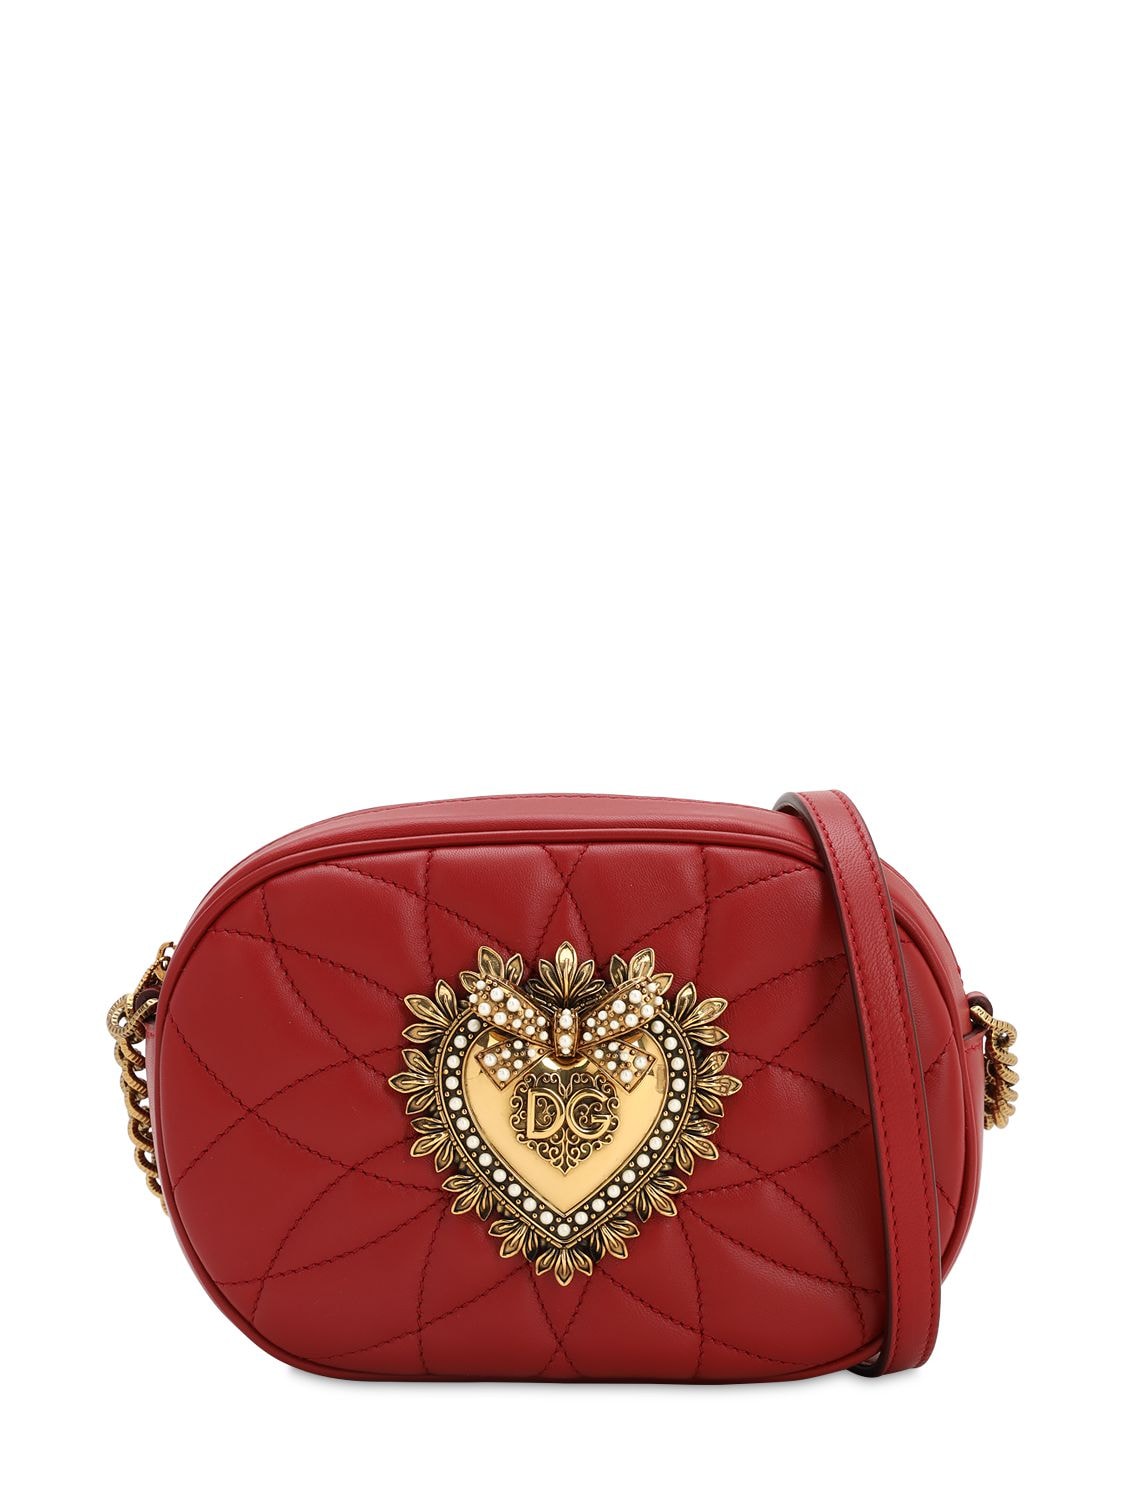 Dolce & Gabbana Devotion Quilted Leather Camera Bag In Rosso Papavero